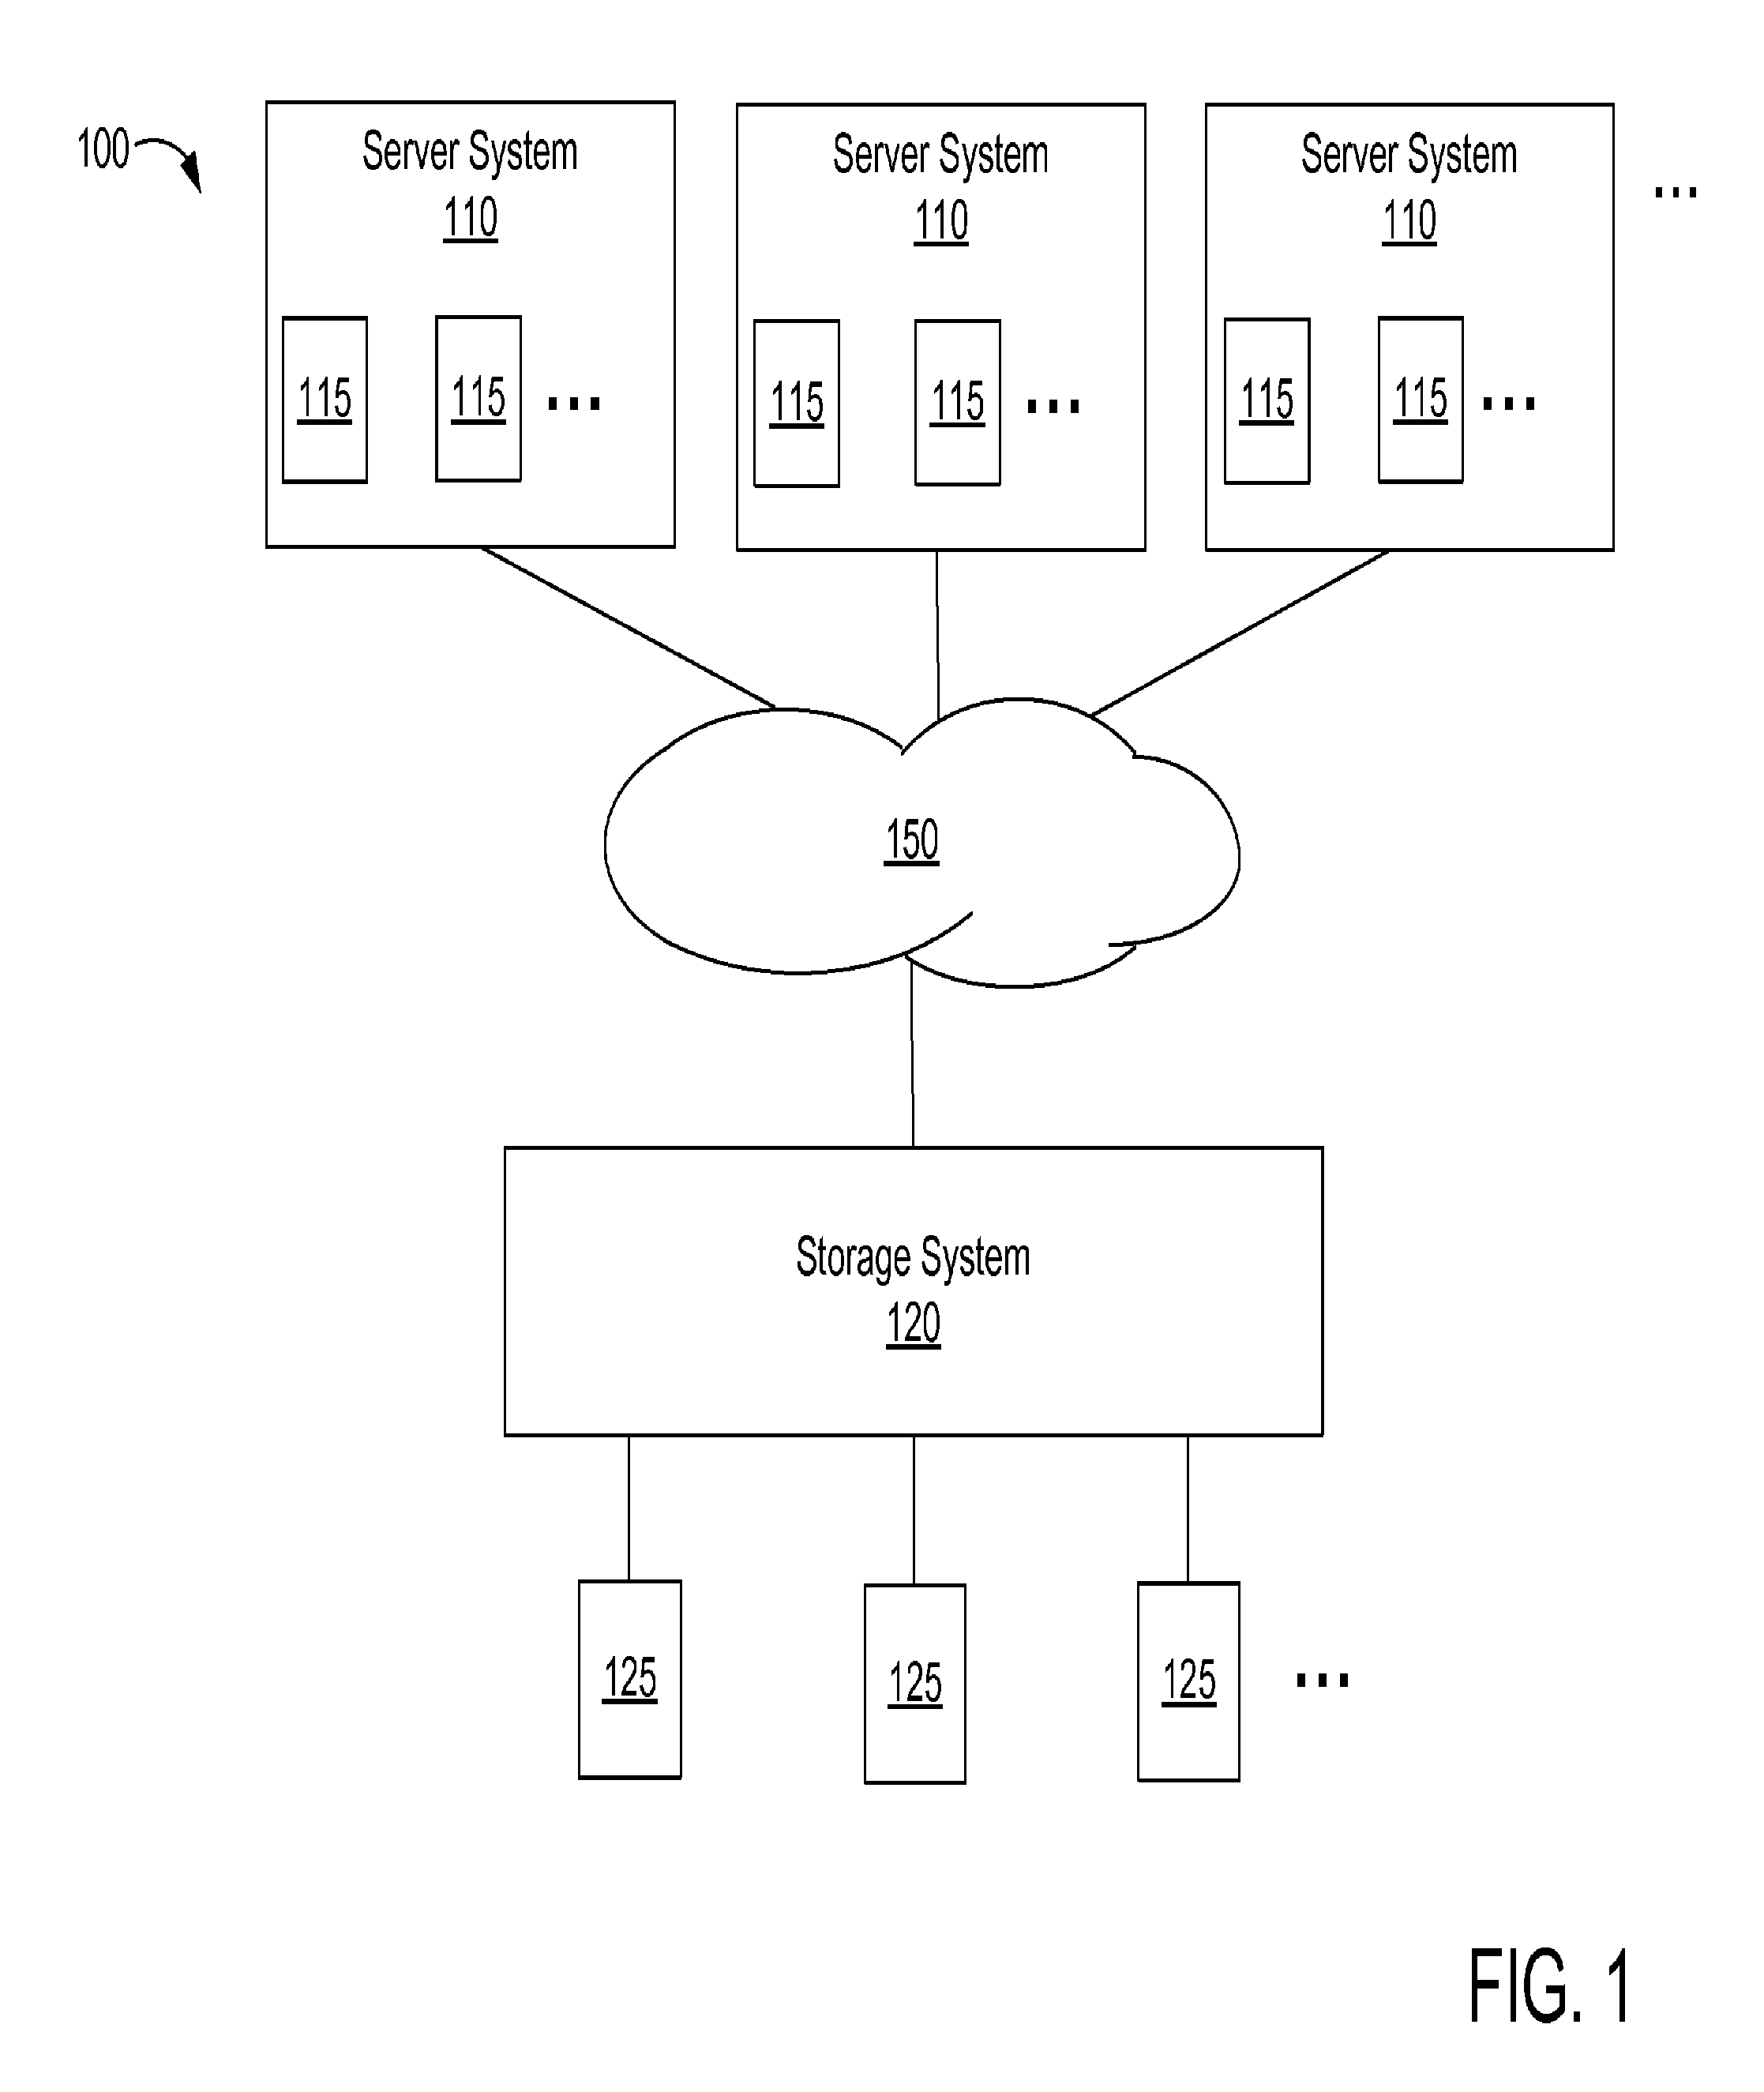 Caching and deduplication of data blocks in cache memory